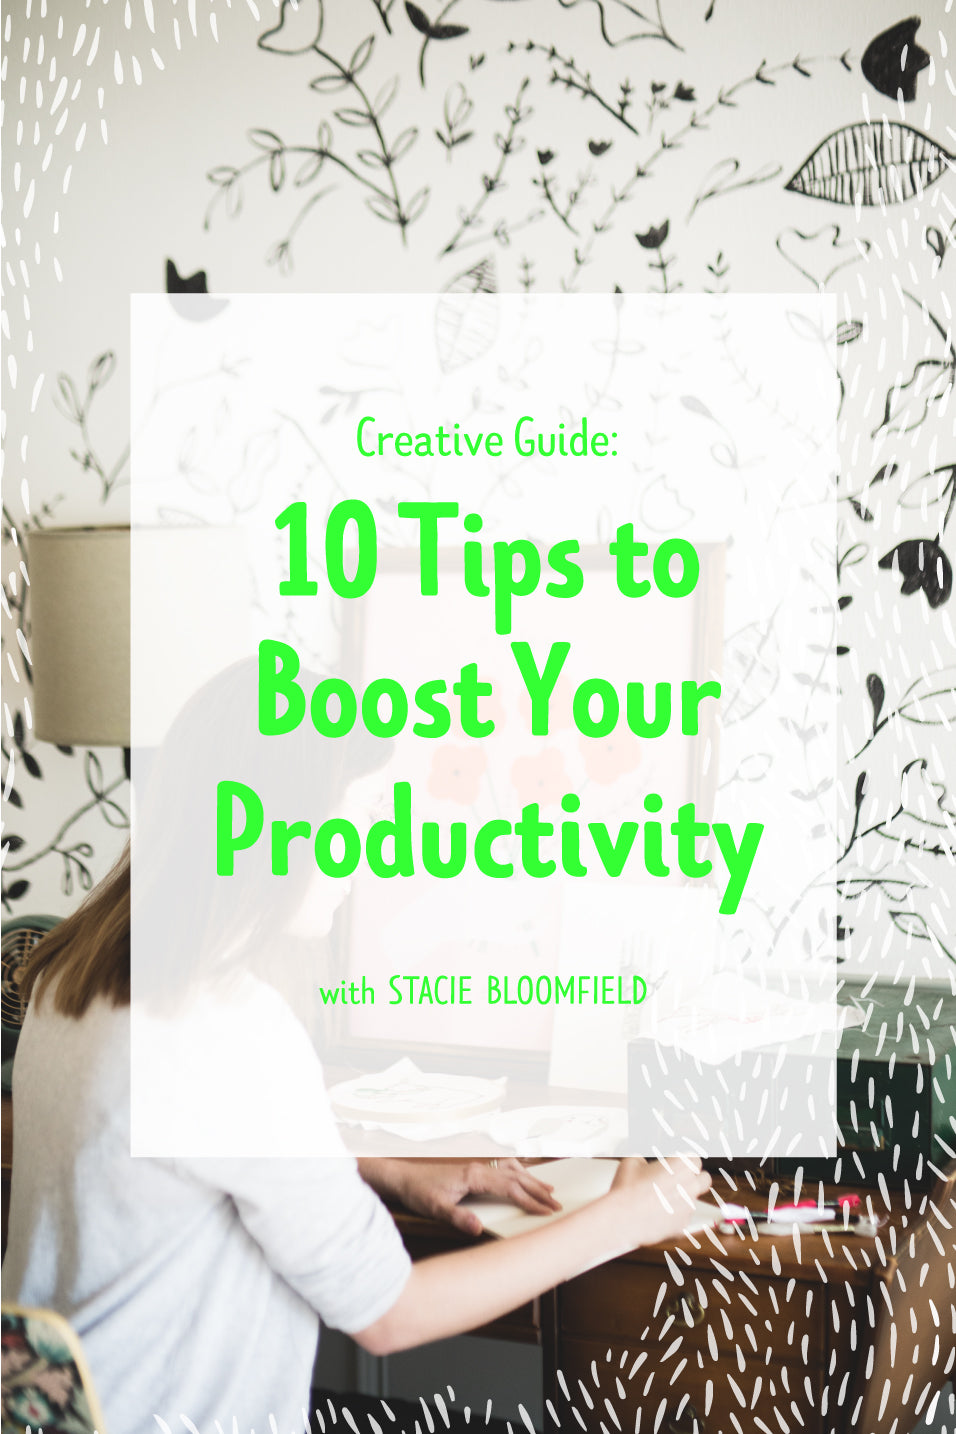 10 Tips to Boost Your Productivity